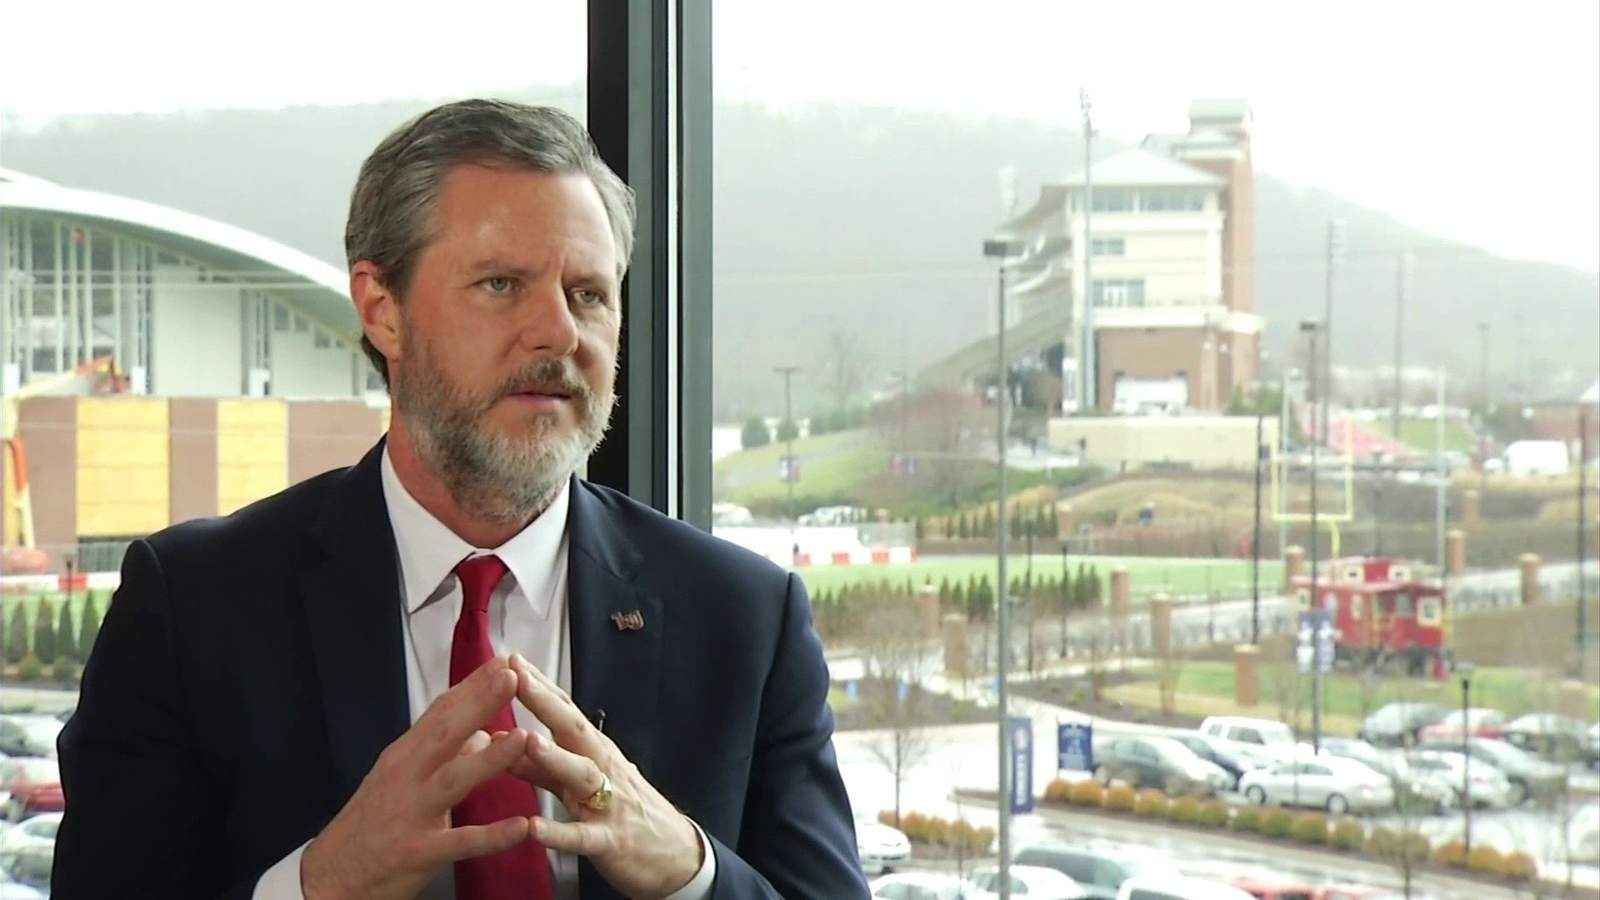 'I must take the necessary steps to restore my reputation’: Jerry Falwell files a lawsuit against Liberty University